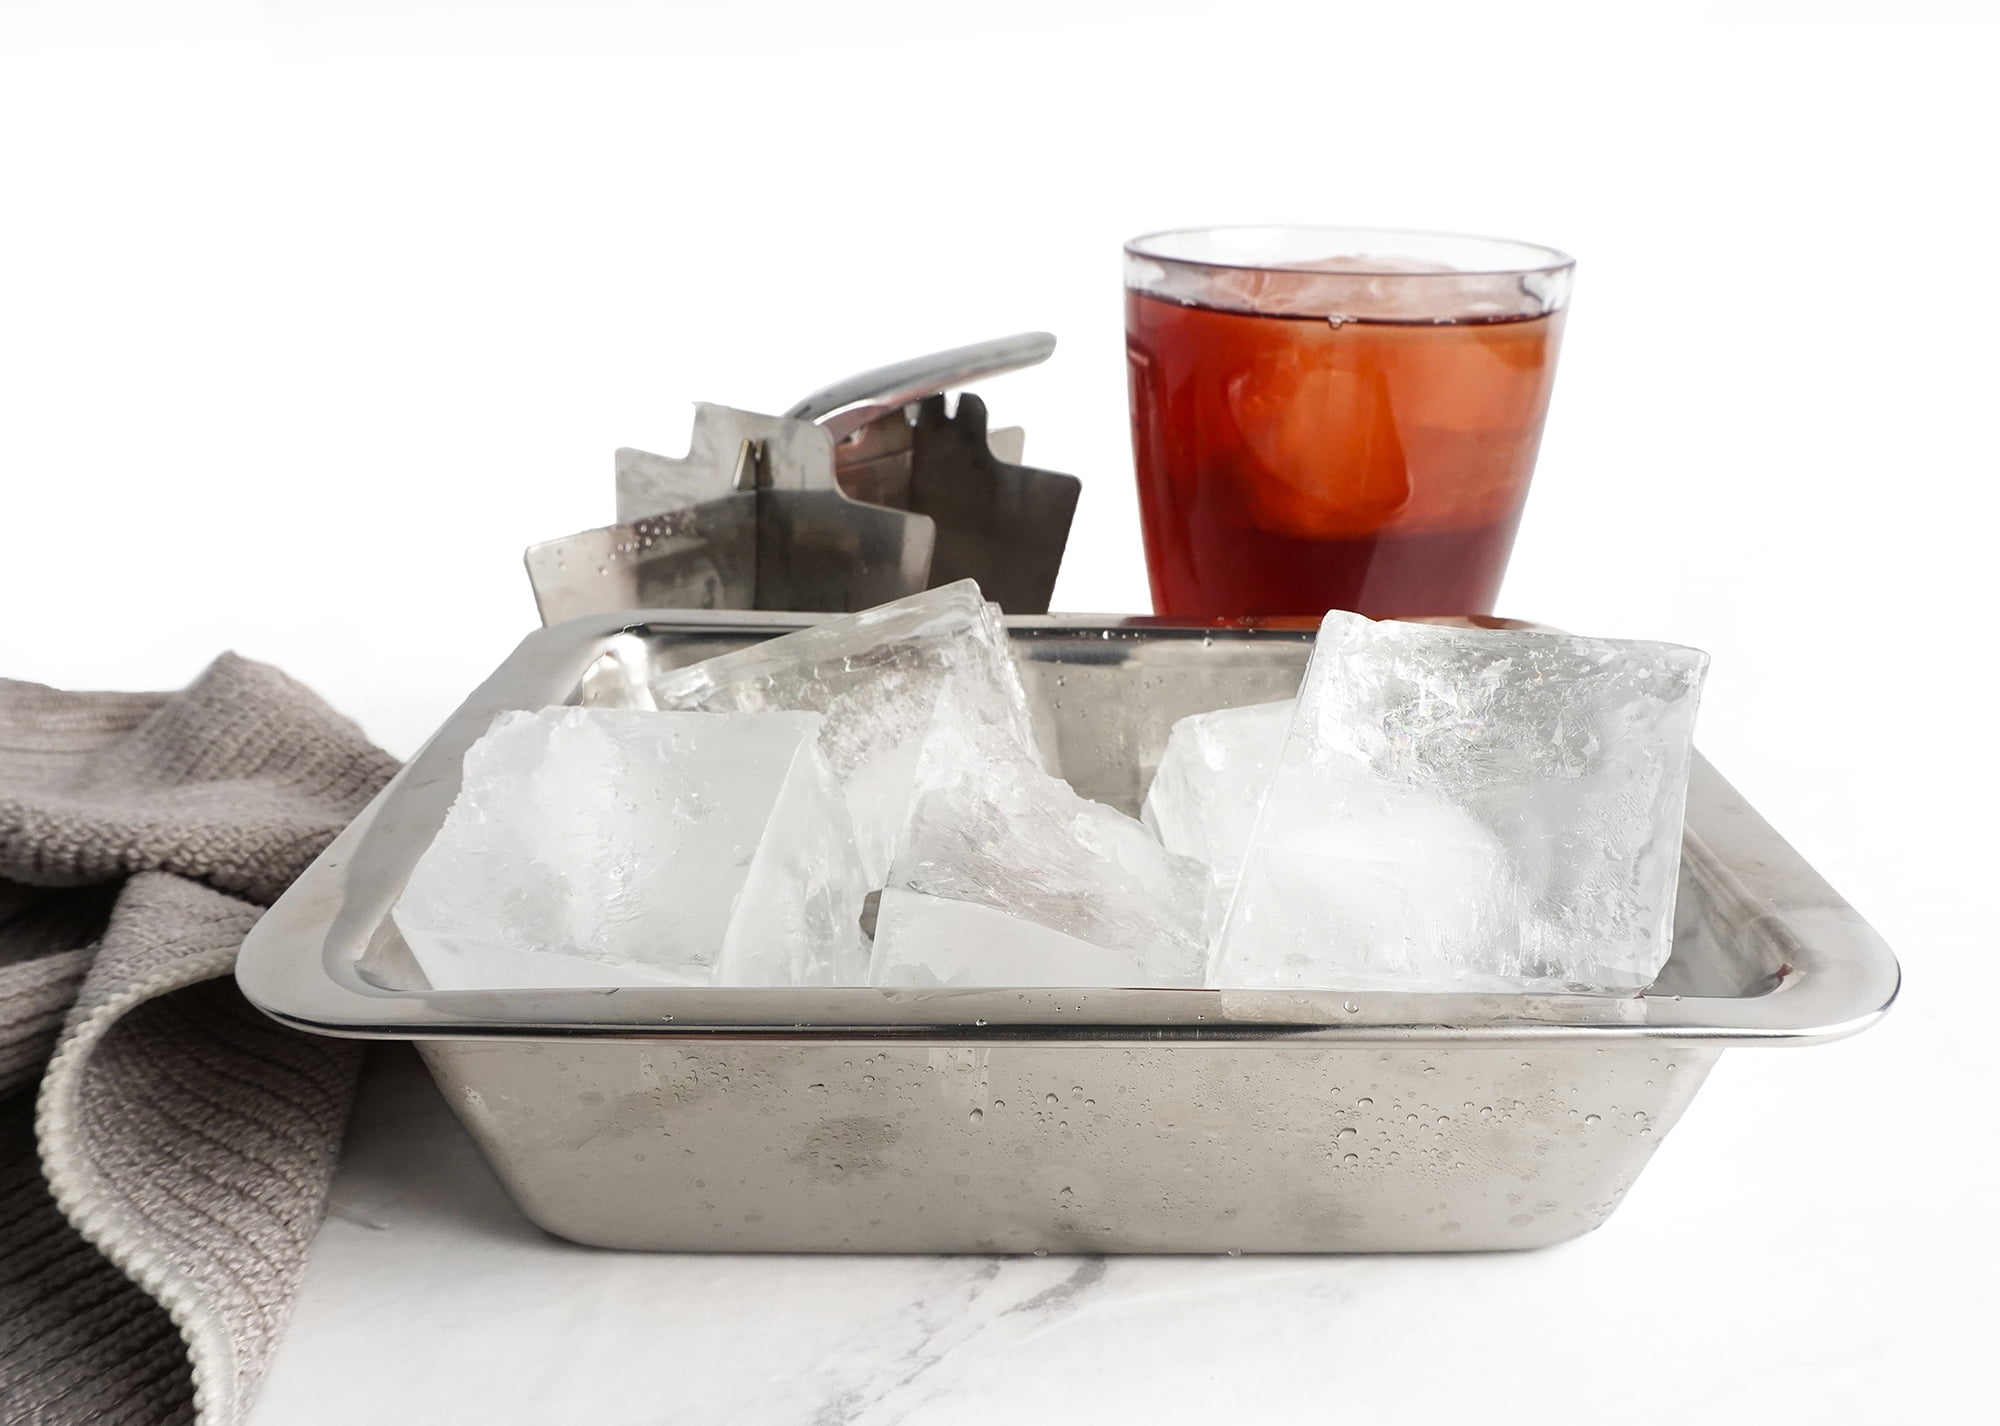 RSVP Stainless Steel Ice Cube Tray 